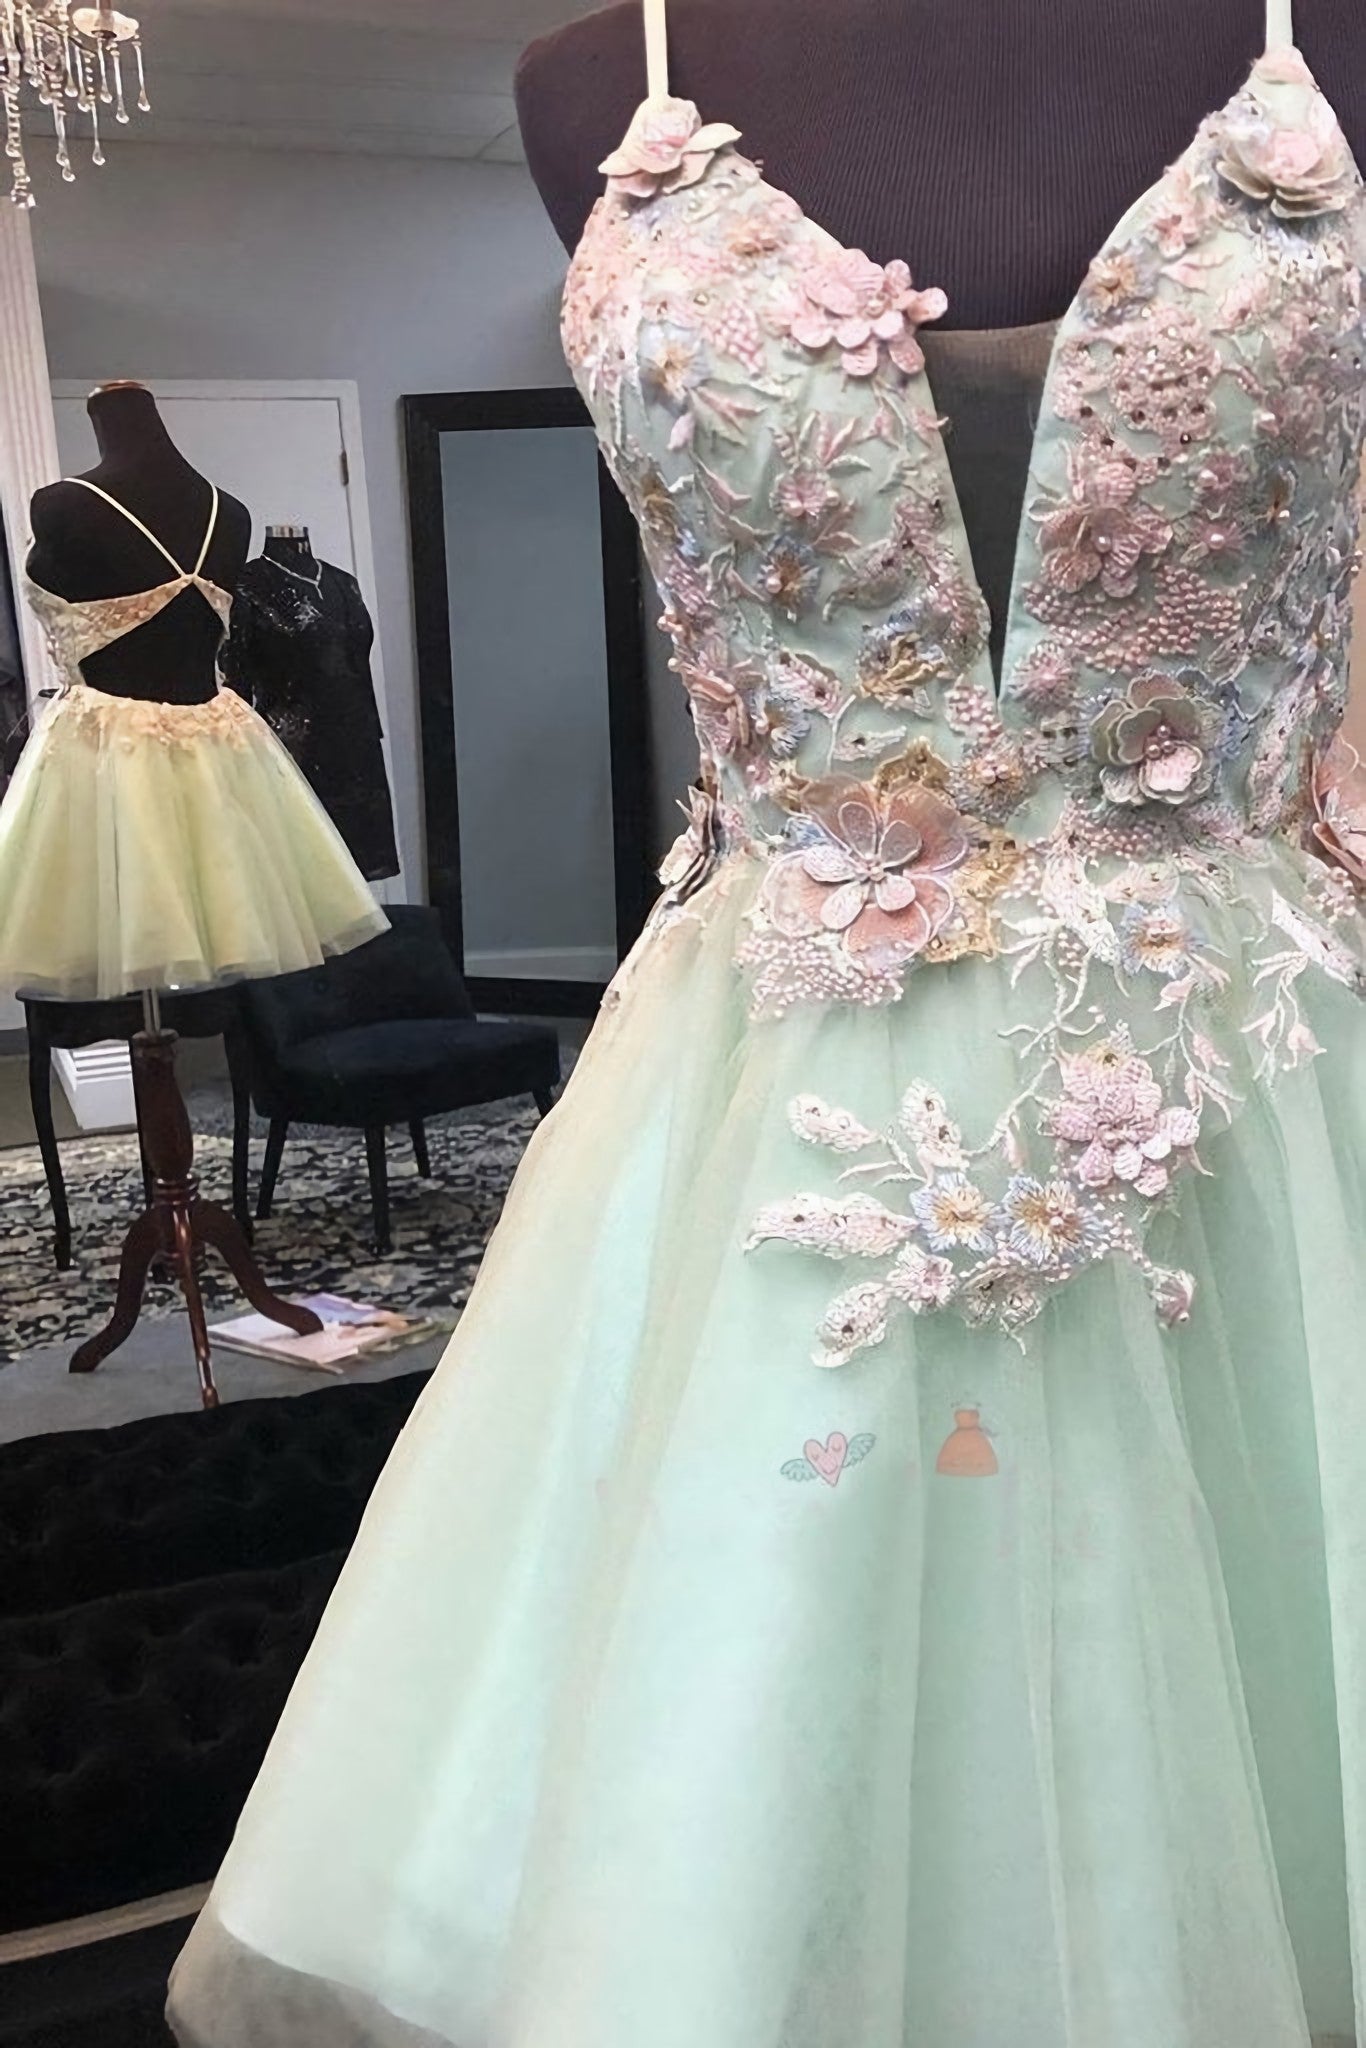 Mint Green Short Homecoming Dress, With Flowers Mini Tulle Graduation Dress, With Pearls